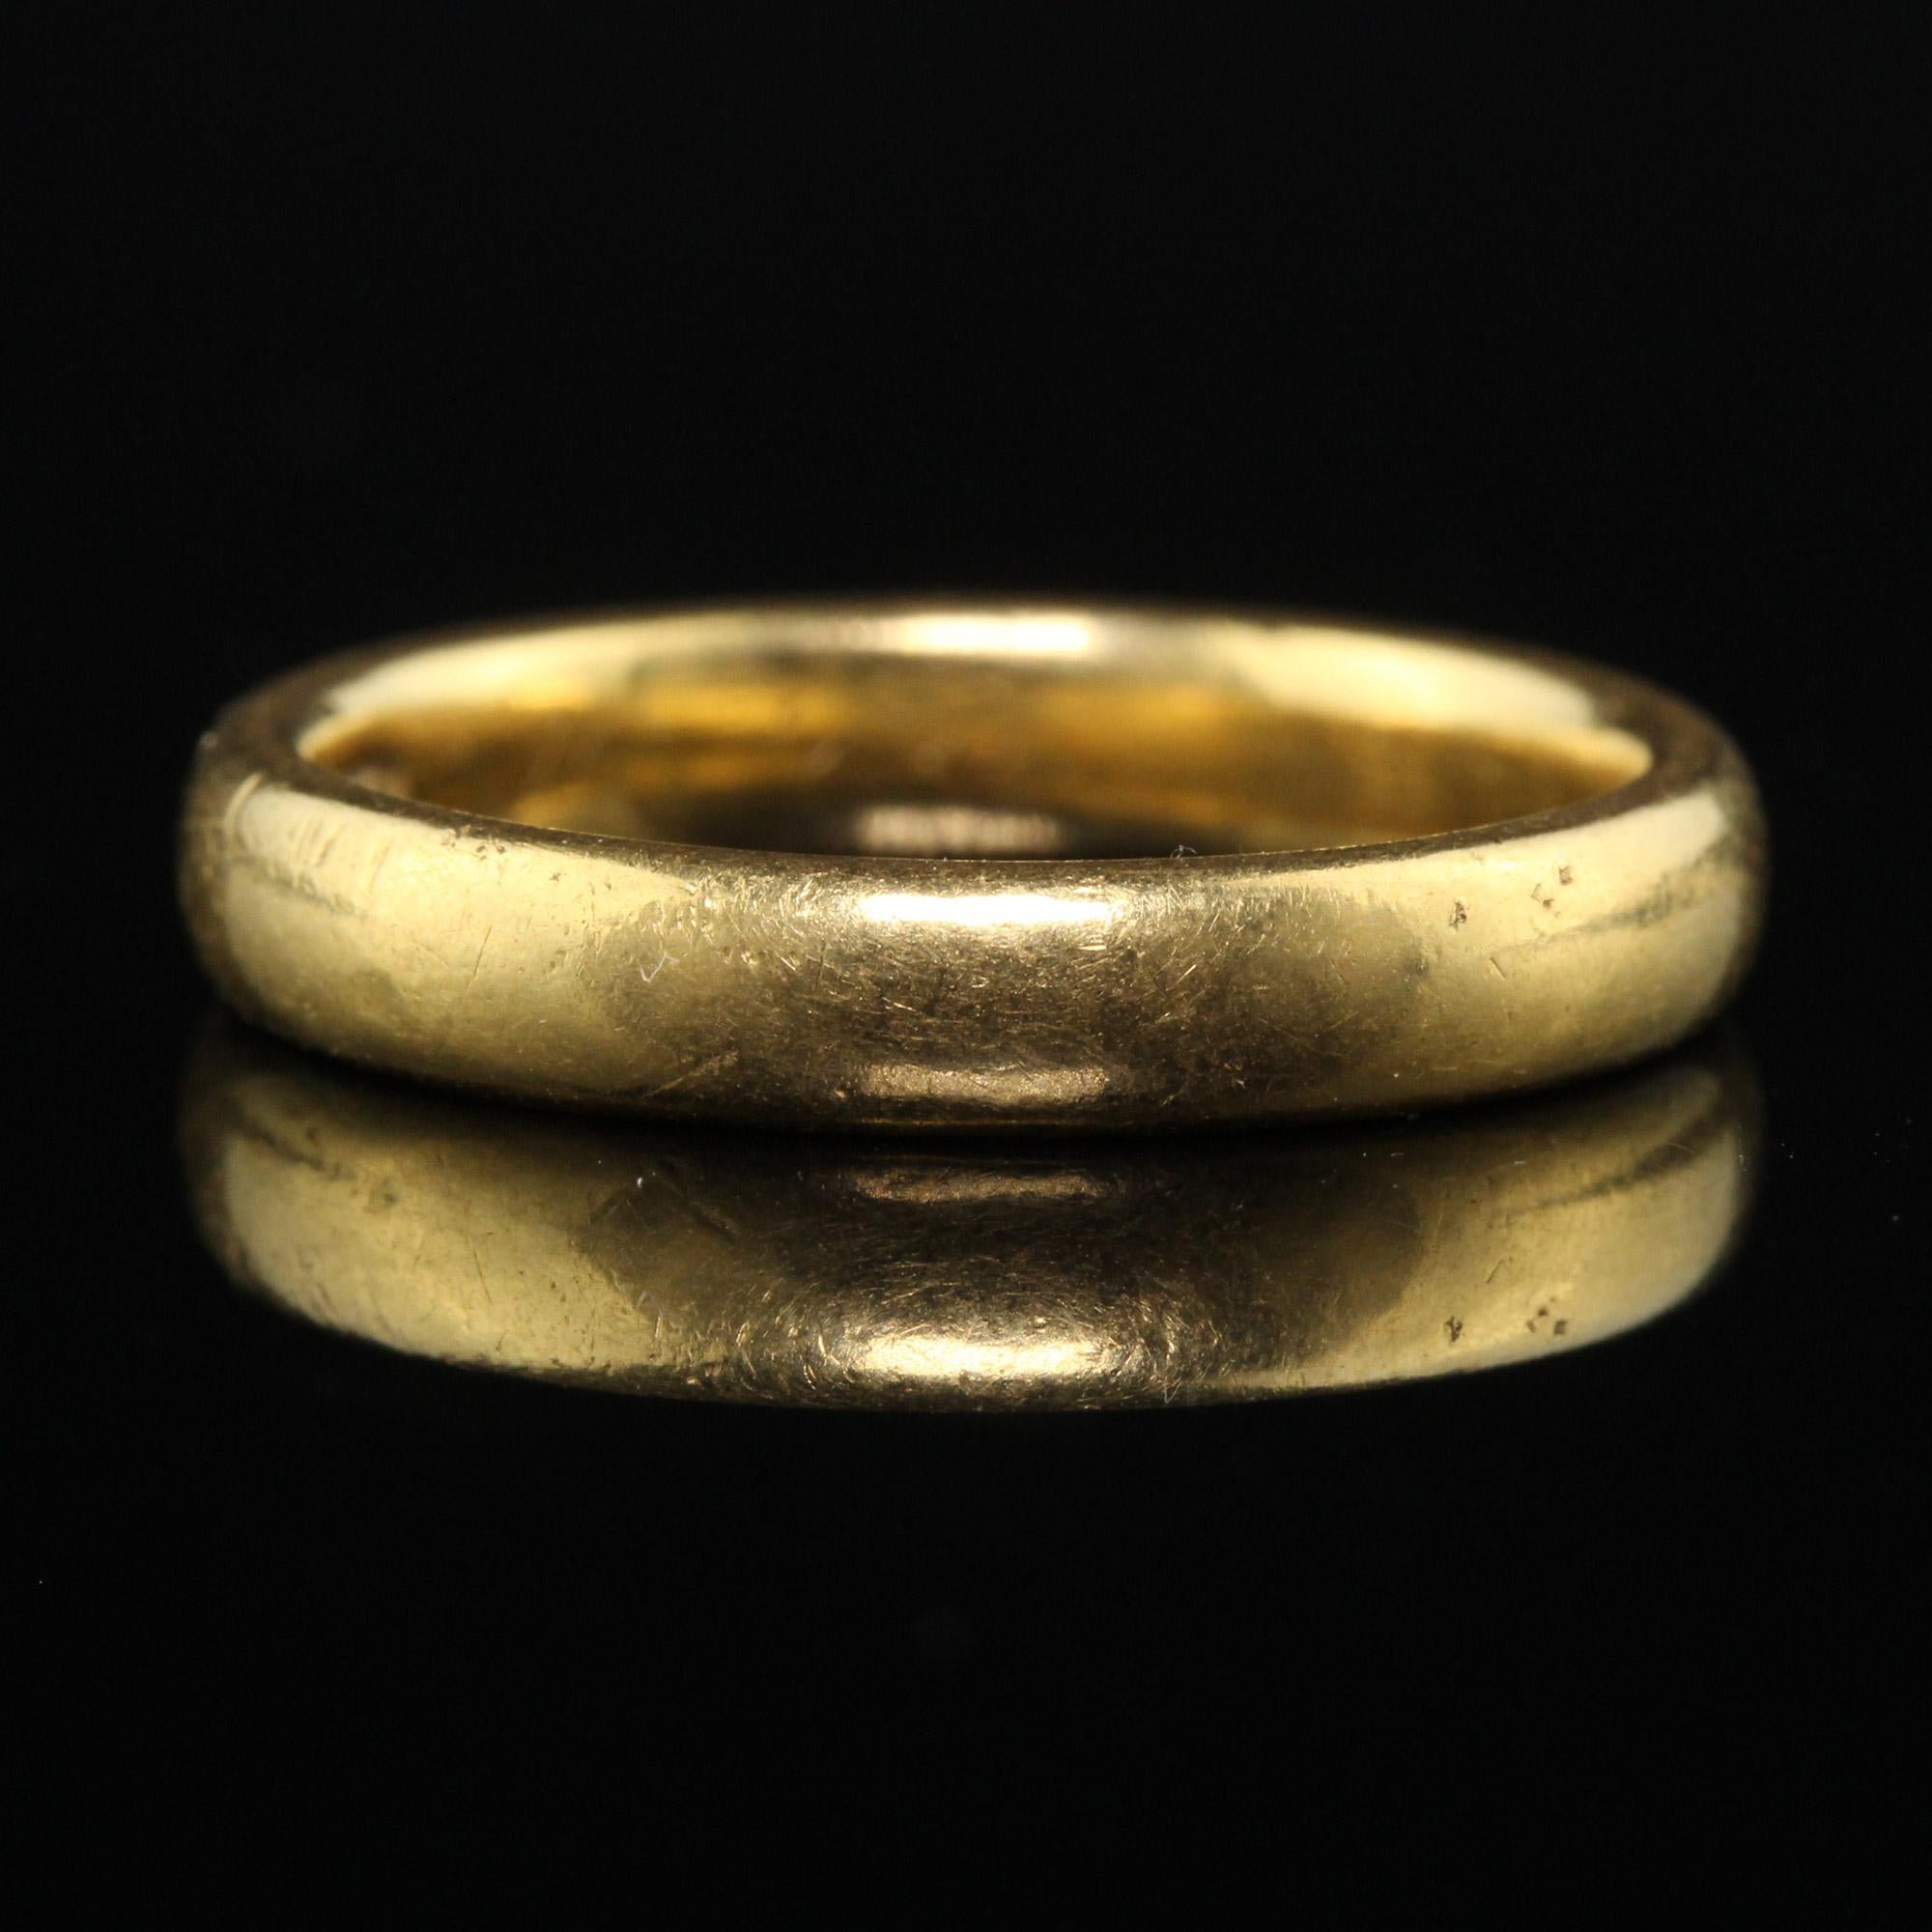 Antique Art Deco Tiffany and Co 22K Yellow Gold Wedding Band - Size 5 1/4 In Good Condition For Sale In Great Neck, NY